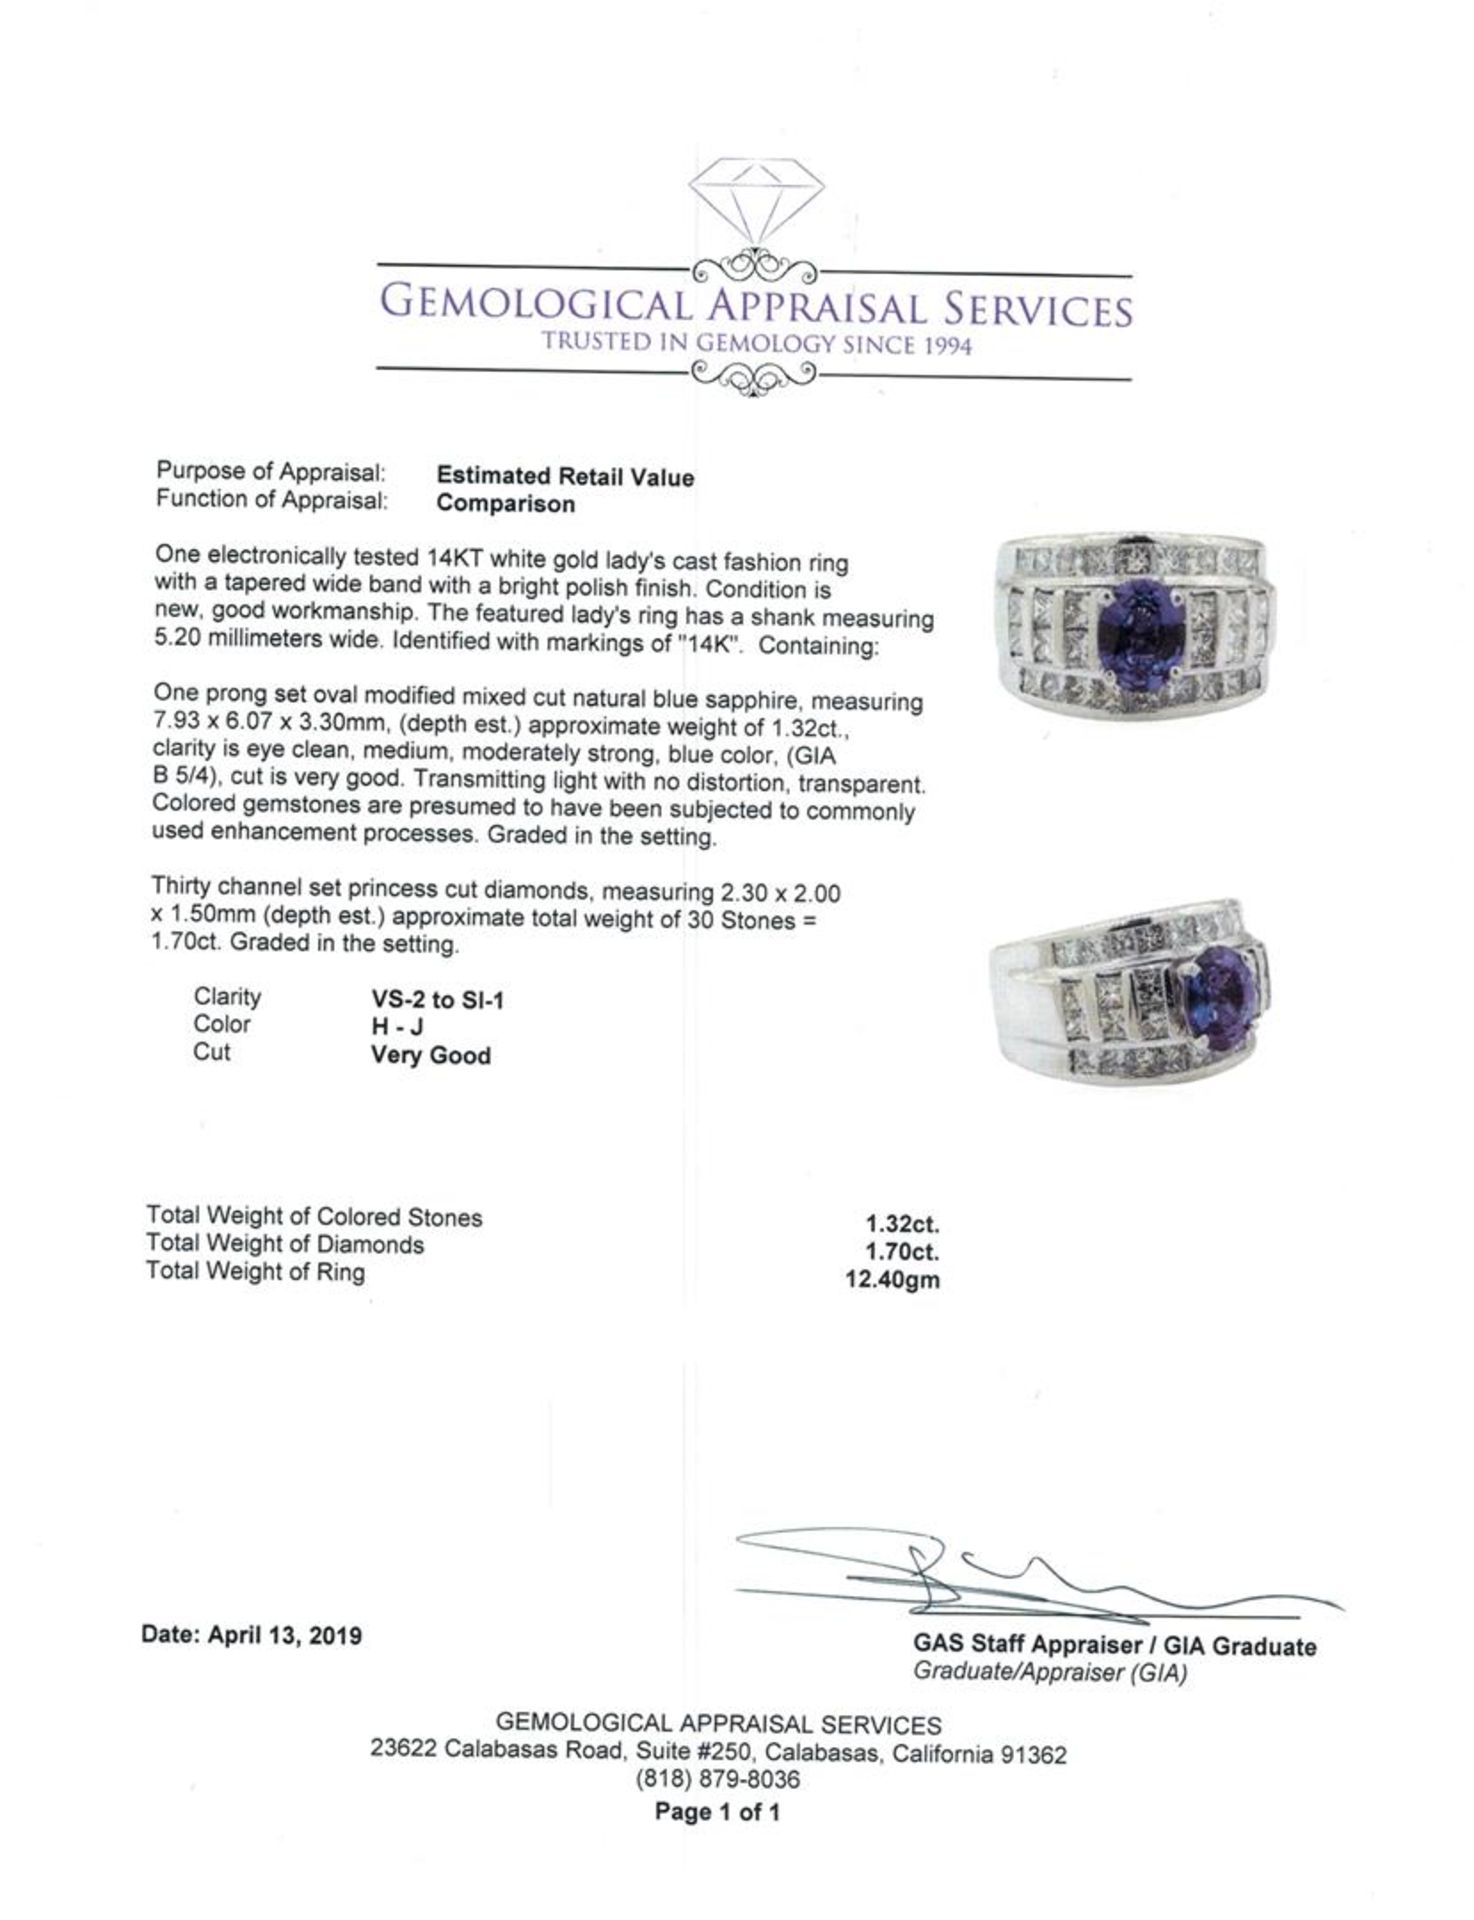 3.02 ctw Sapphire And Diamond Ring - 14KT White Gold - Image 5 of 5